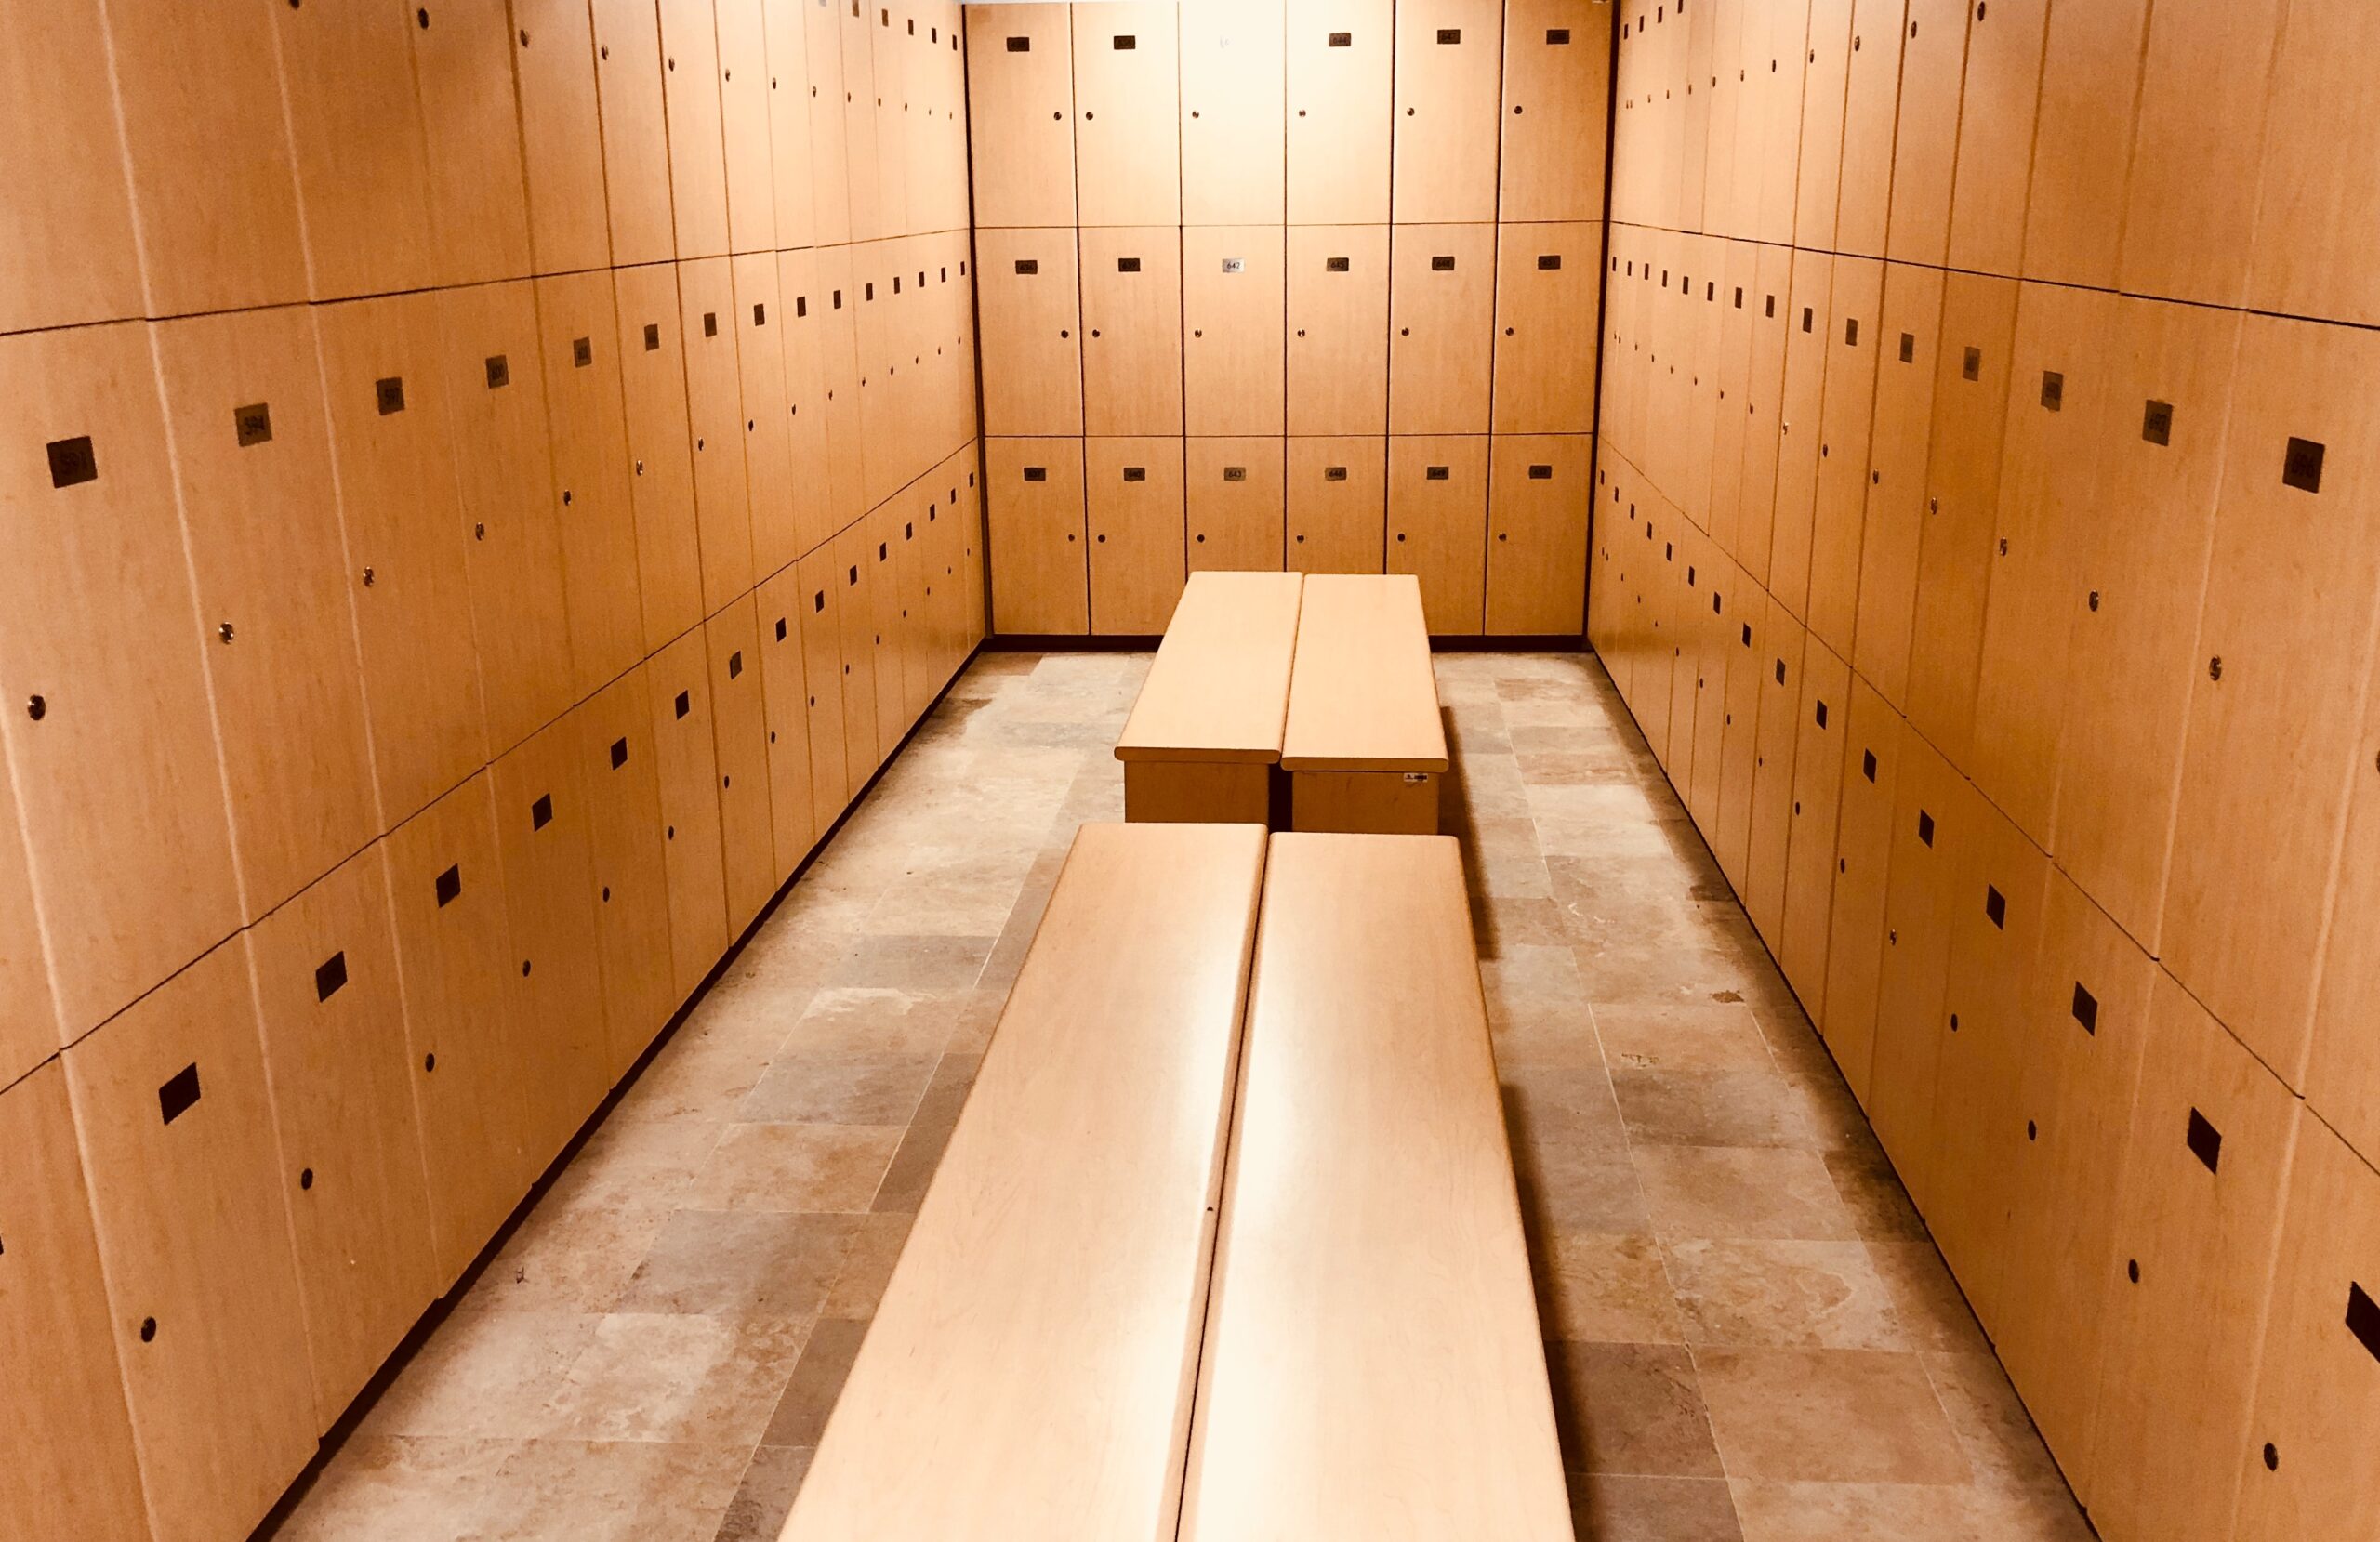 amber kremer recommends My Own Private Locker Room